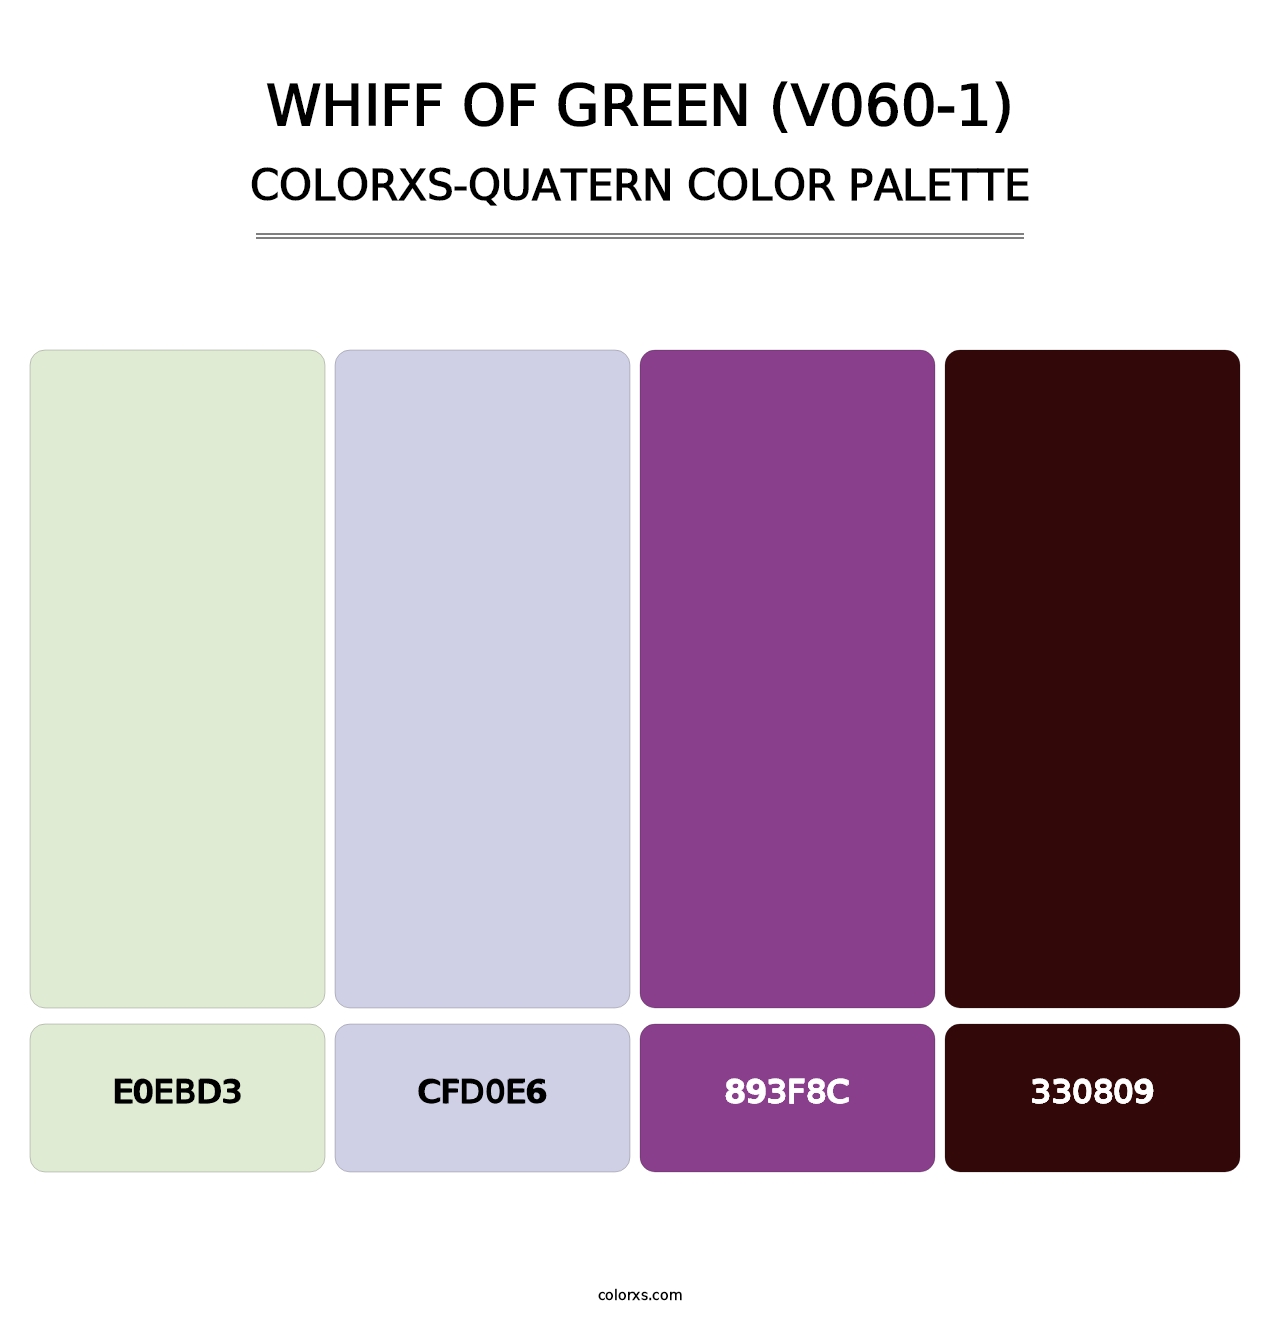 Whiff of Green (V060-1) - Colorxs Quatern Palette